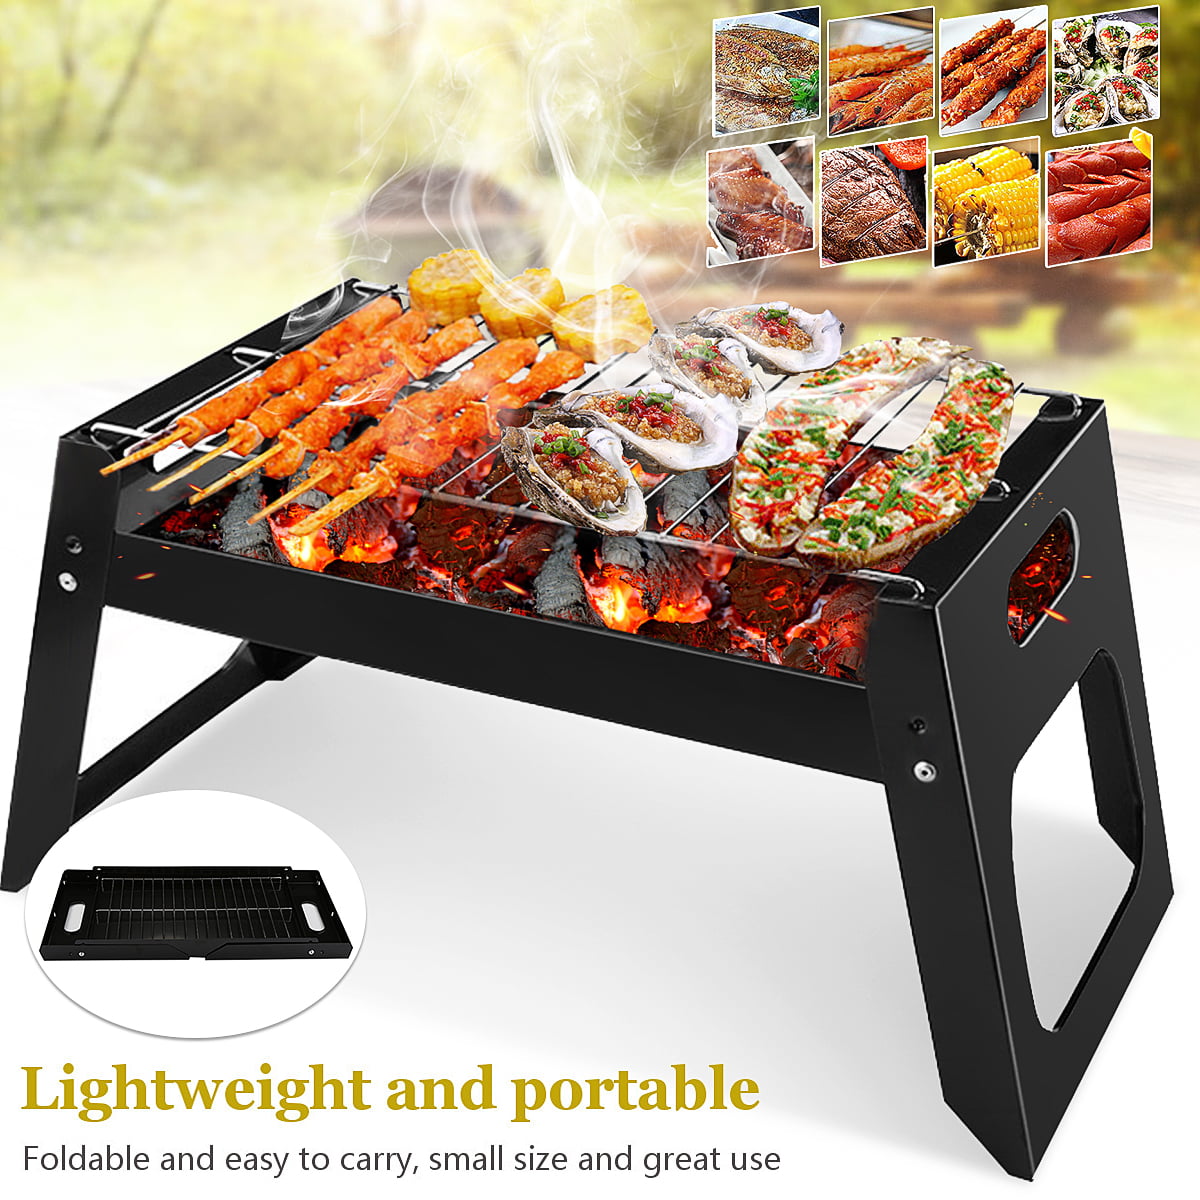 BBQ Barbecue Grill Folding Portable Charcoal Stove Cooker Camping Garden Outdoor 